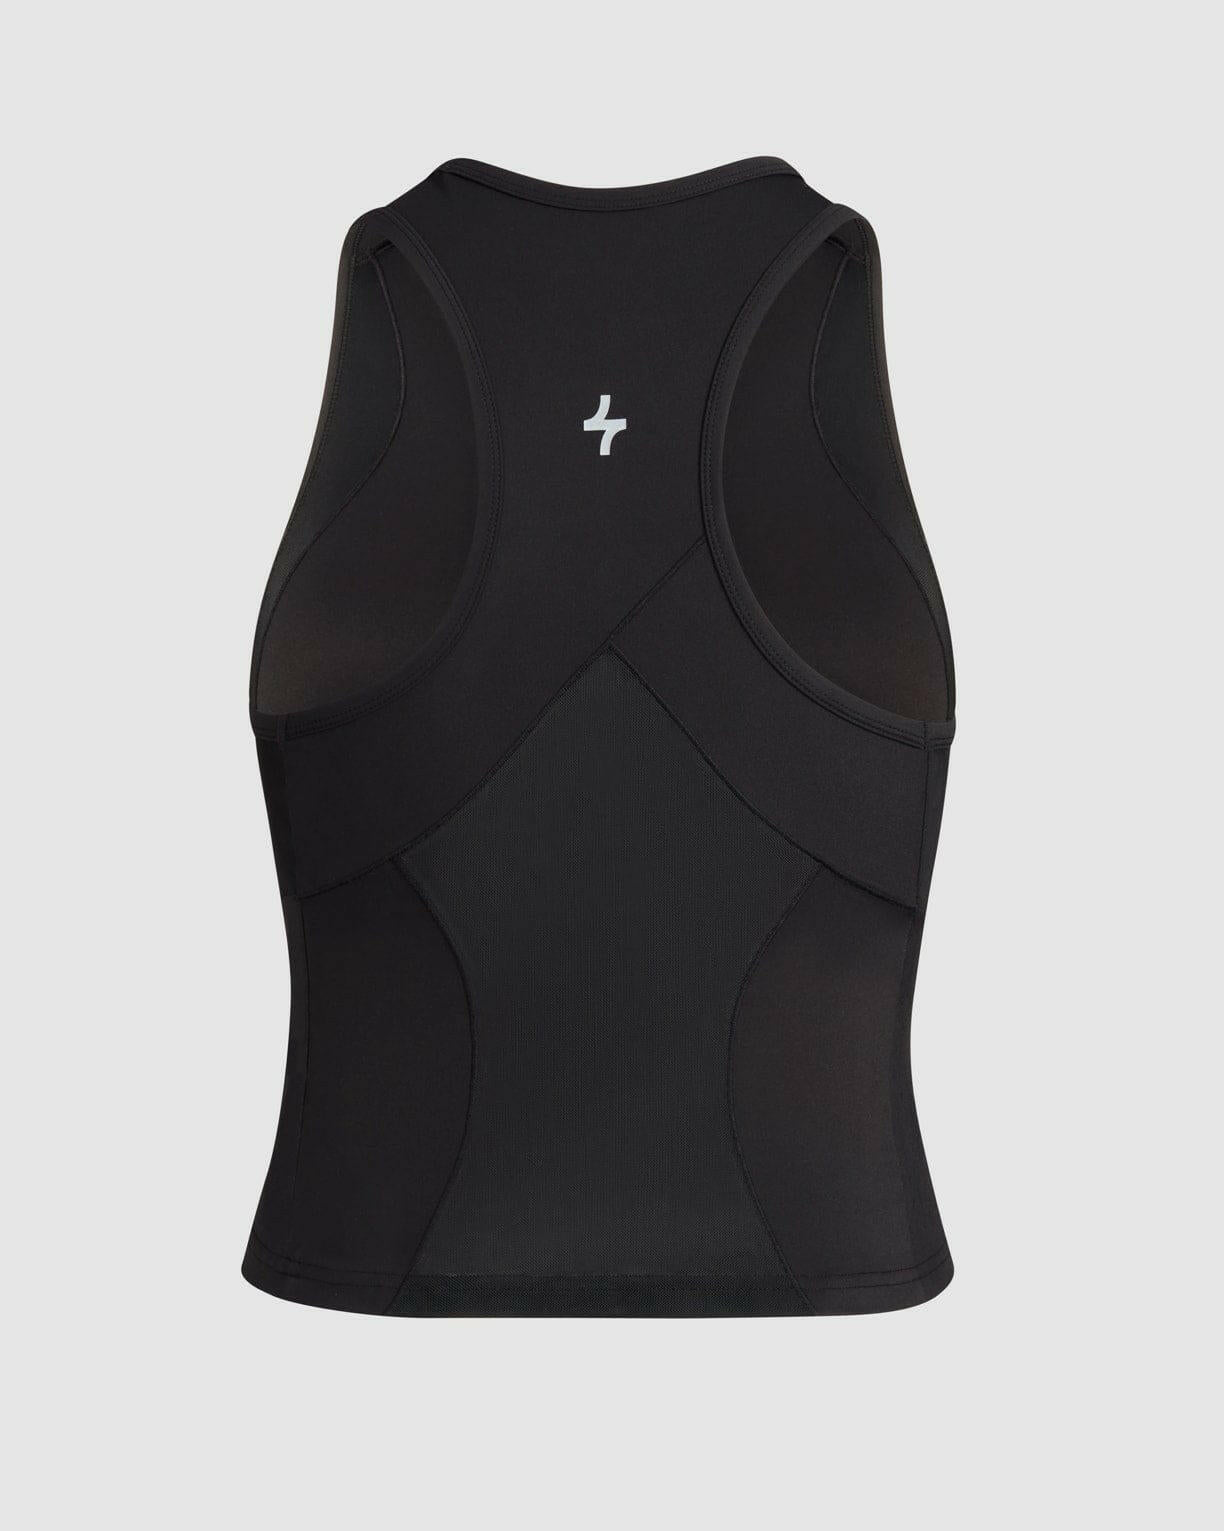 A black sleeveless BADA TANK TOP with qynda logo and mesh back isolated on a white background.